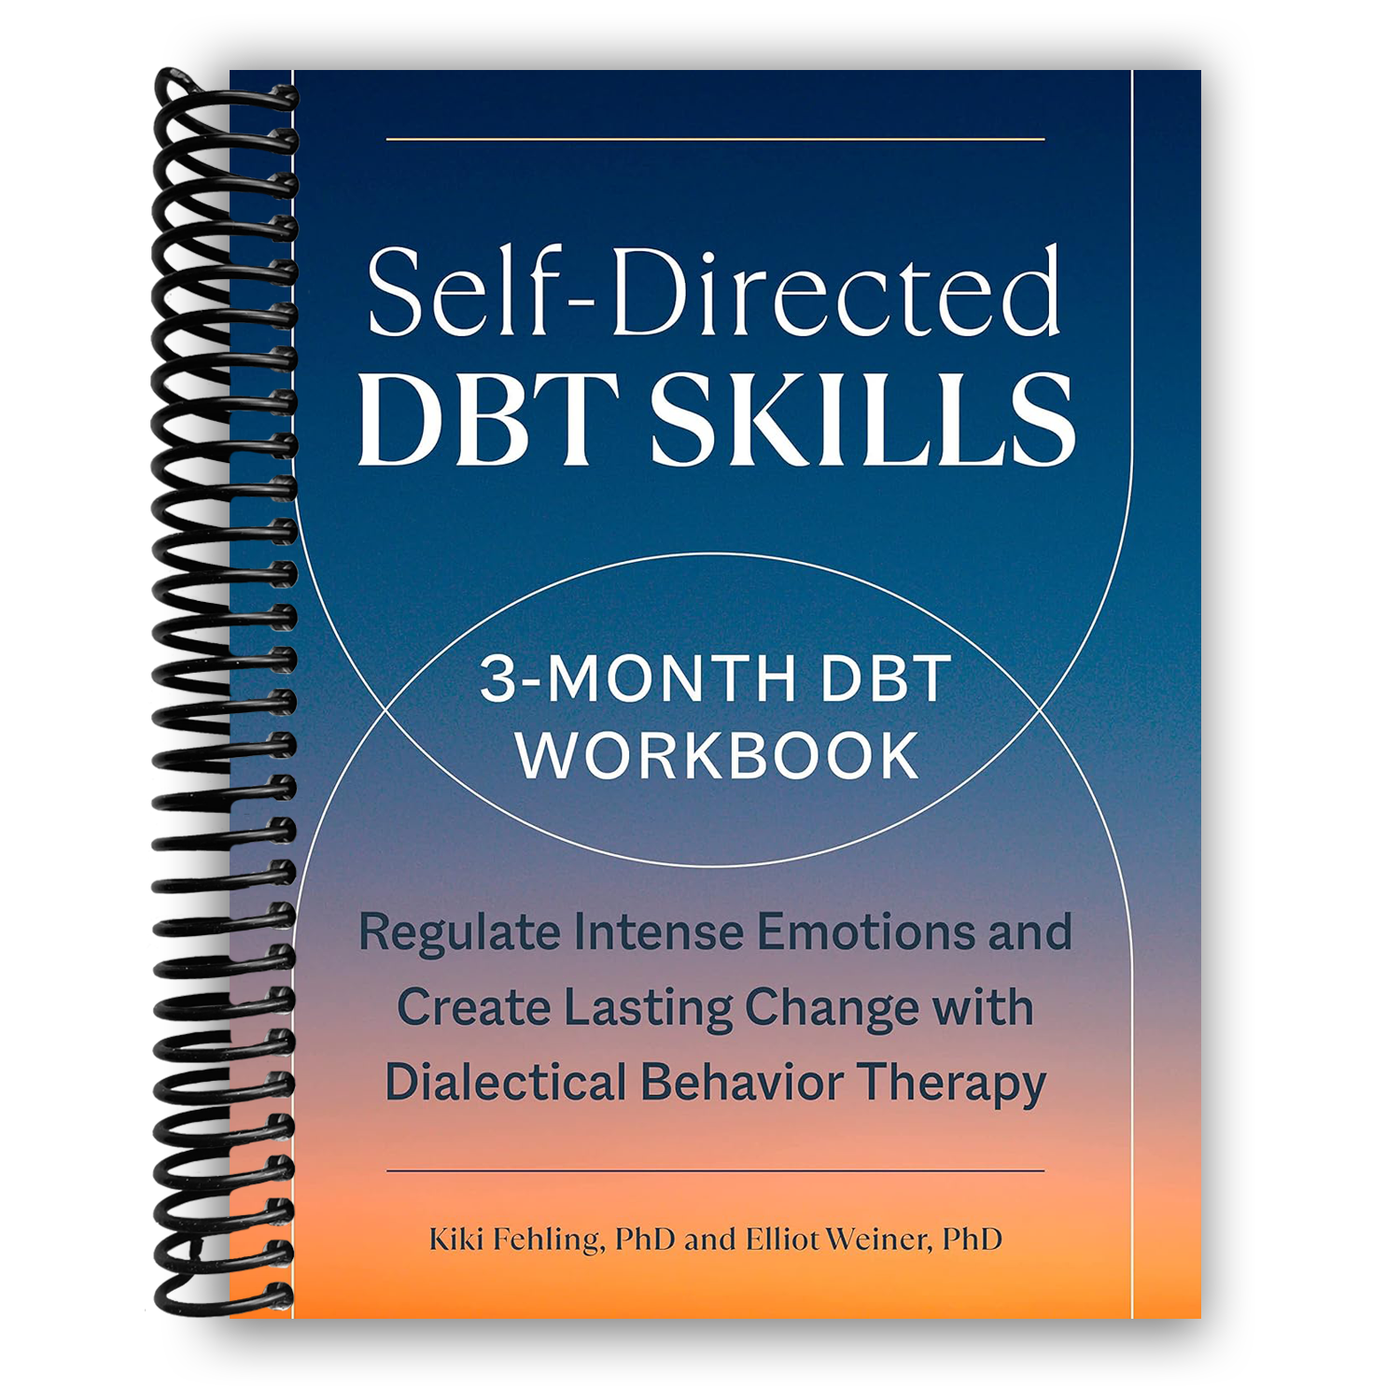 Self-Directed DBT Skills: A 3-Month DBT Workbook to Regulate Intense Emotions and Create Lasting Change with Dialectical Behavior Therapy (Spiral Bound)